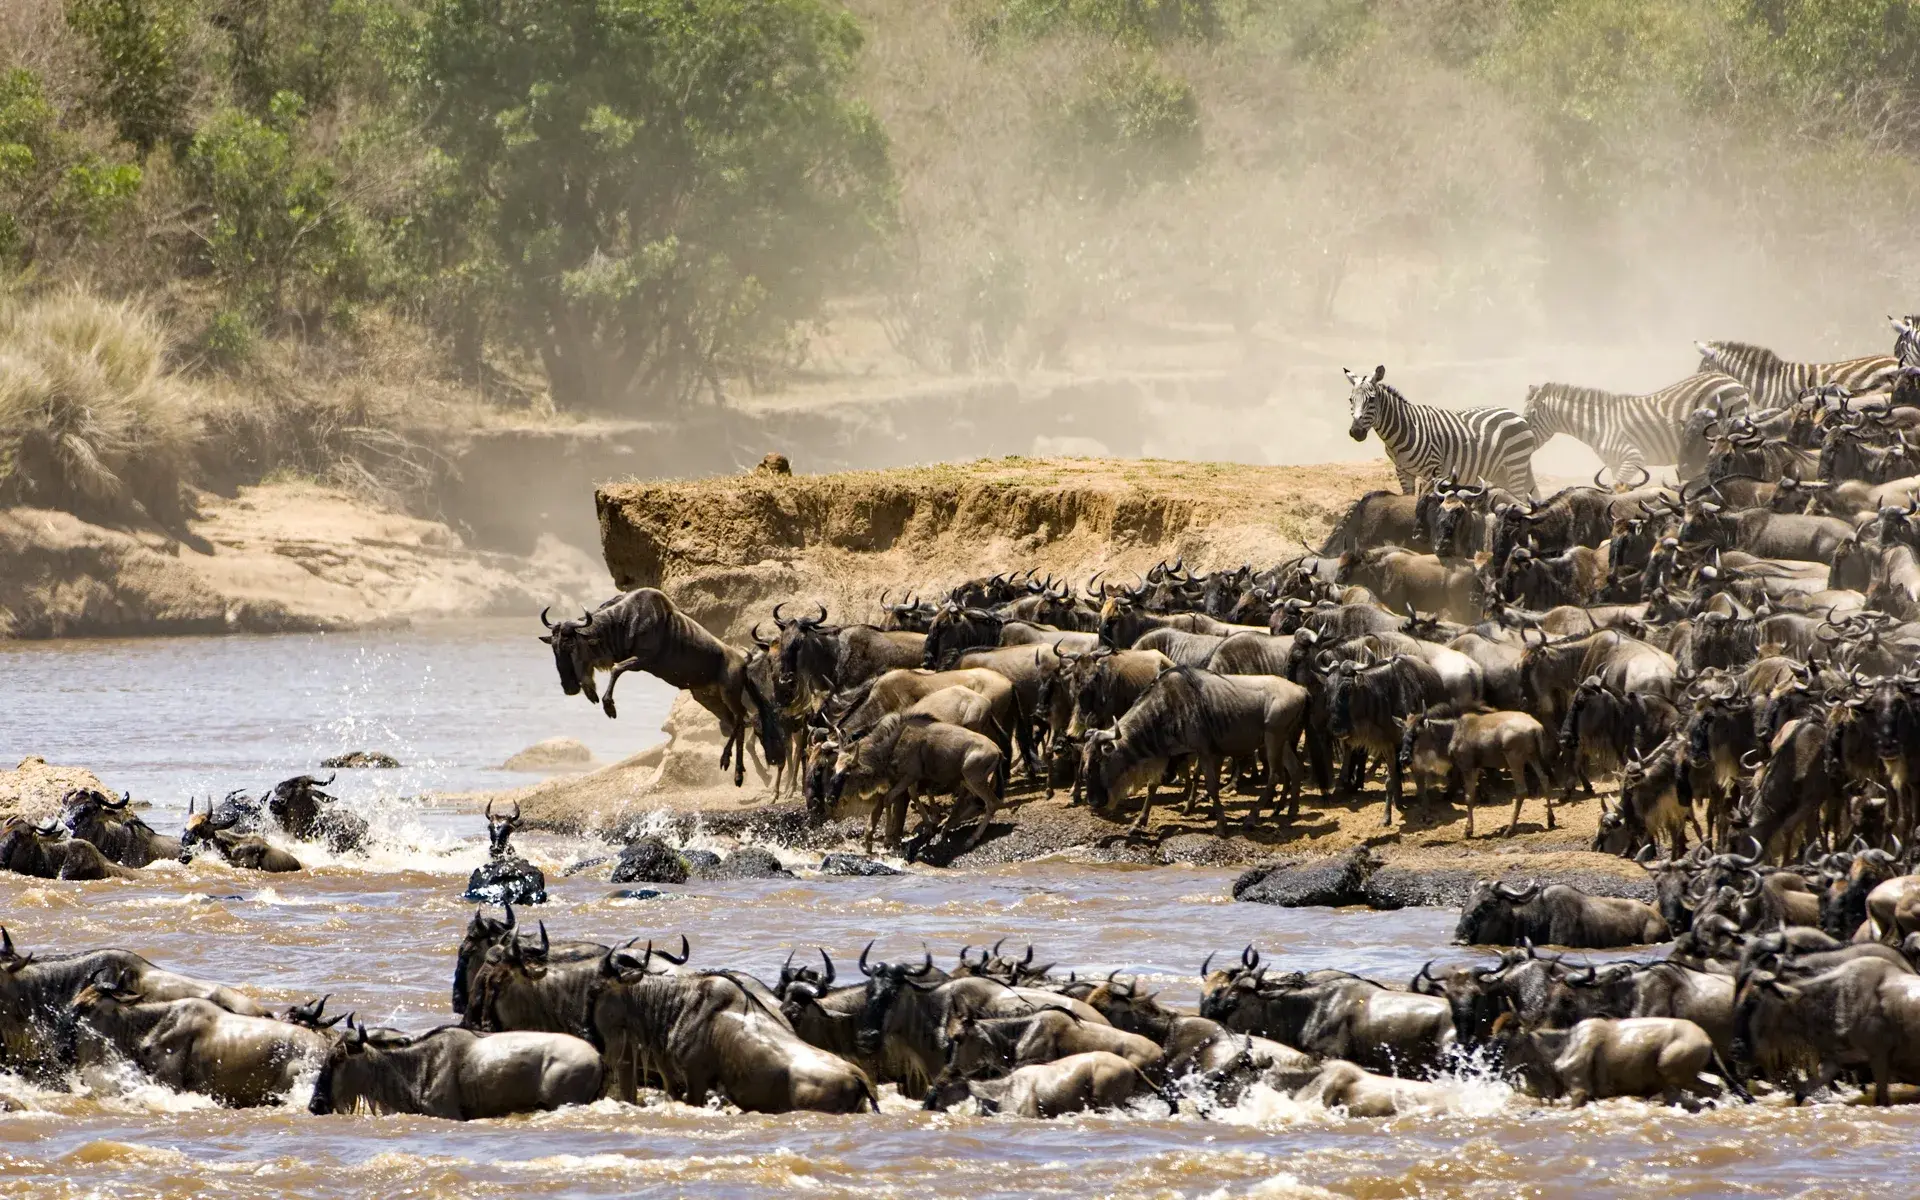 The great migration river crossing, thousands of wildebeests and zebra crossing river in Africa